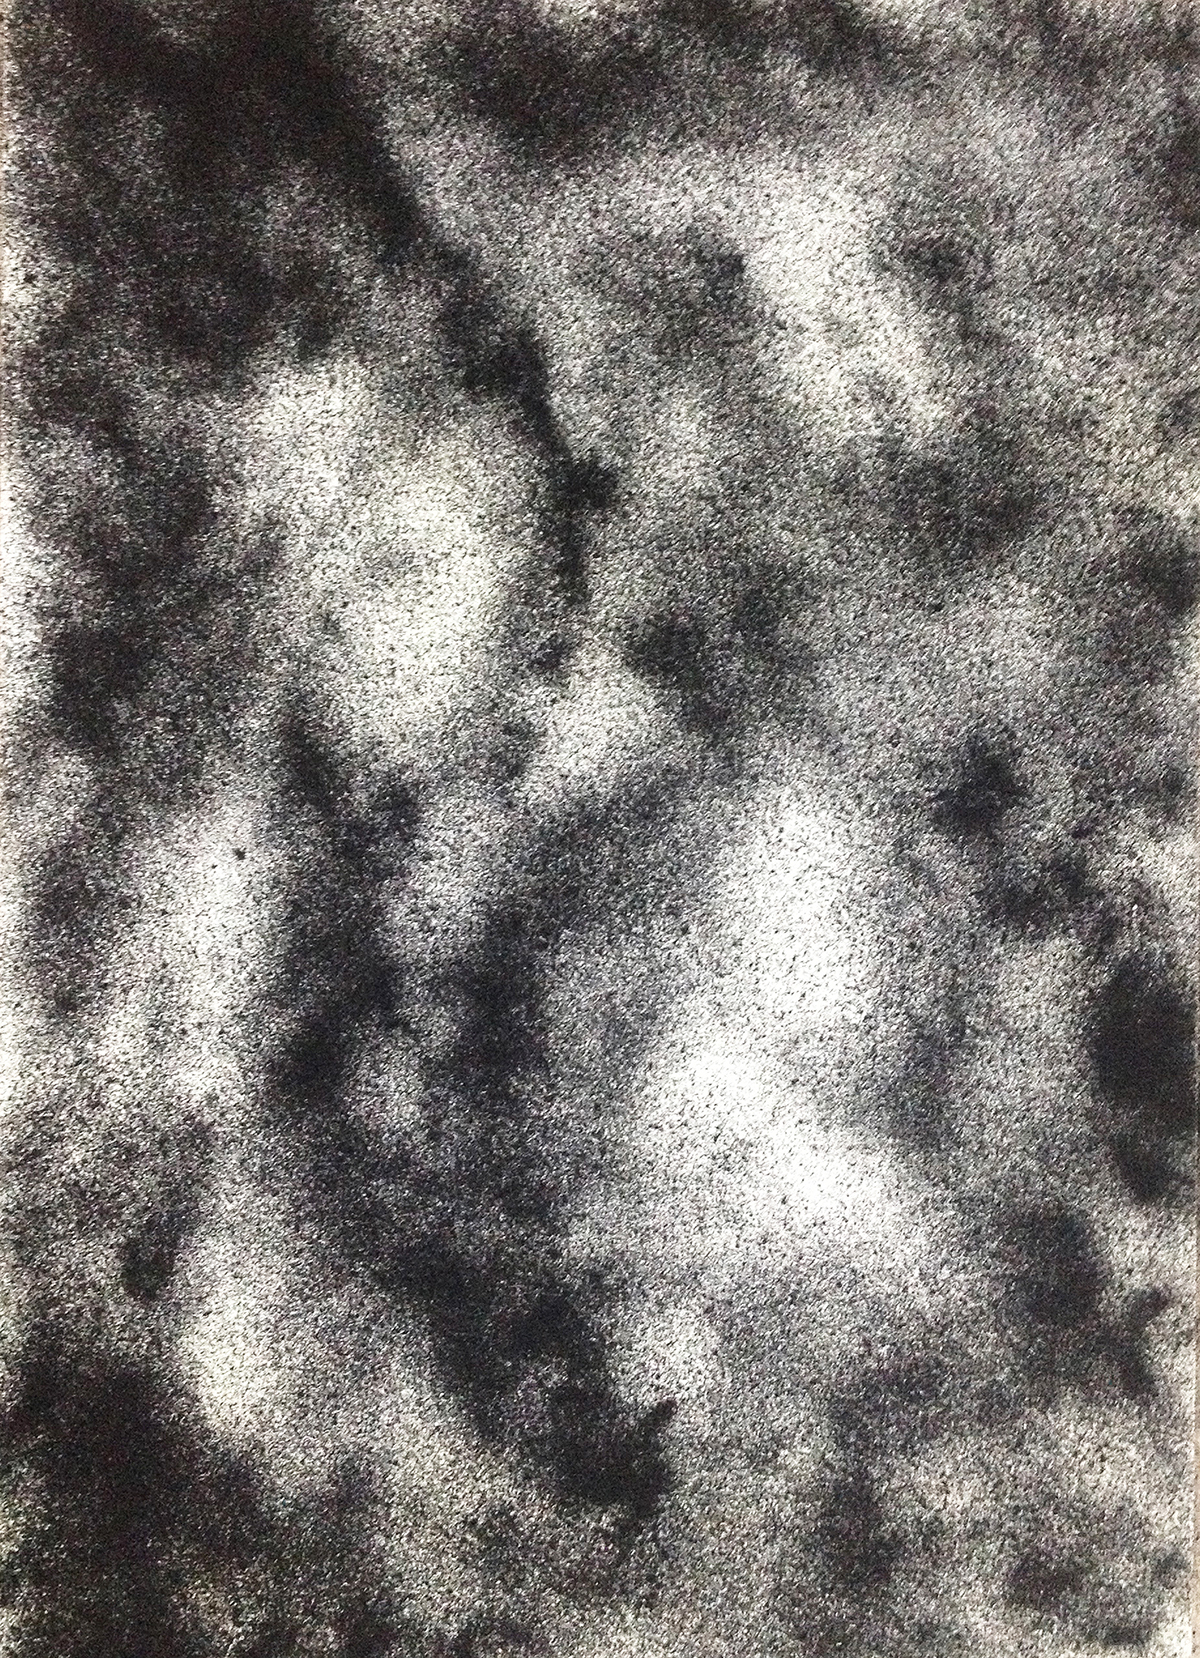 charcoal paper canvas dust polvo carboncillo